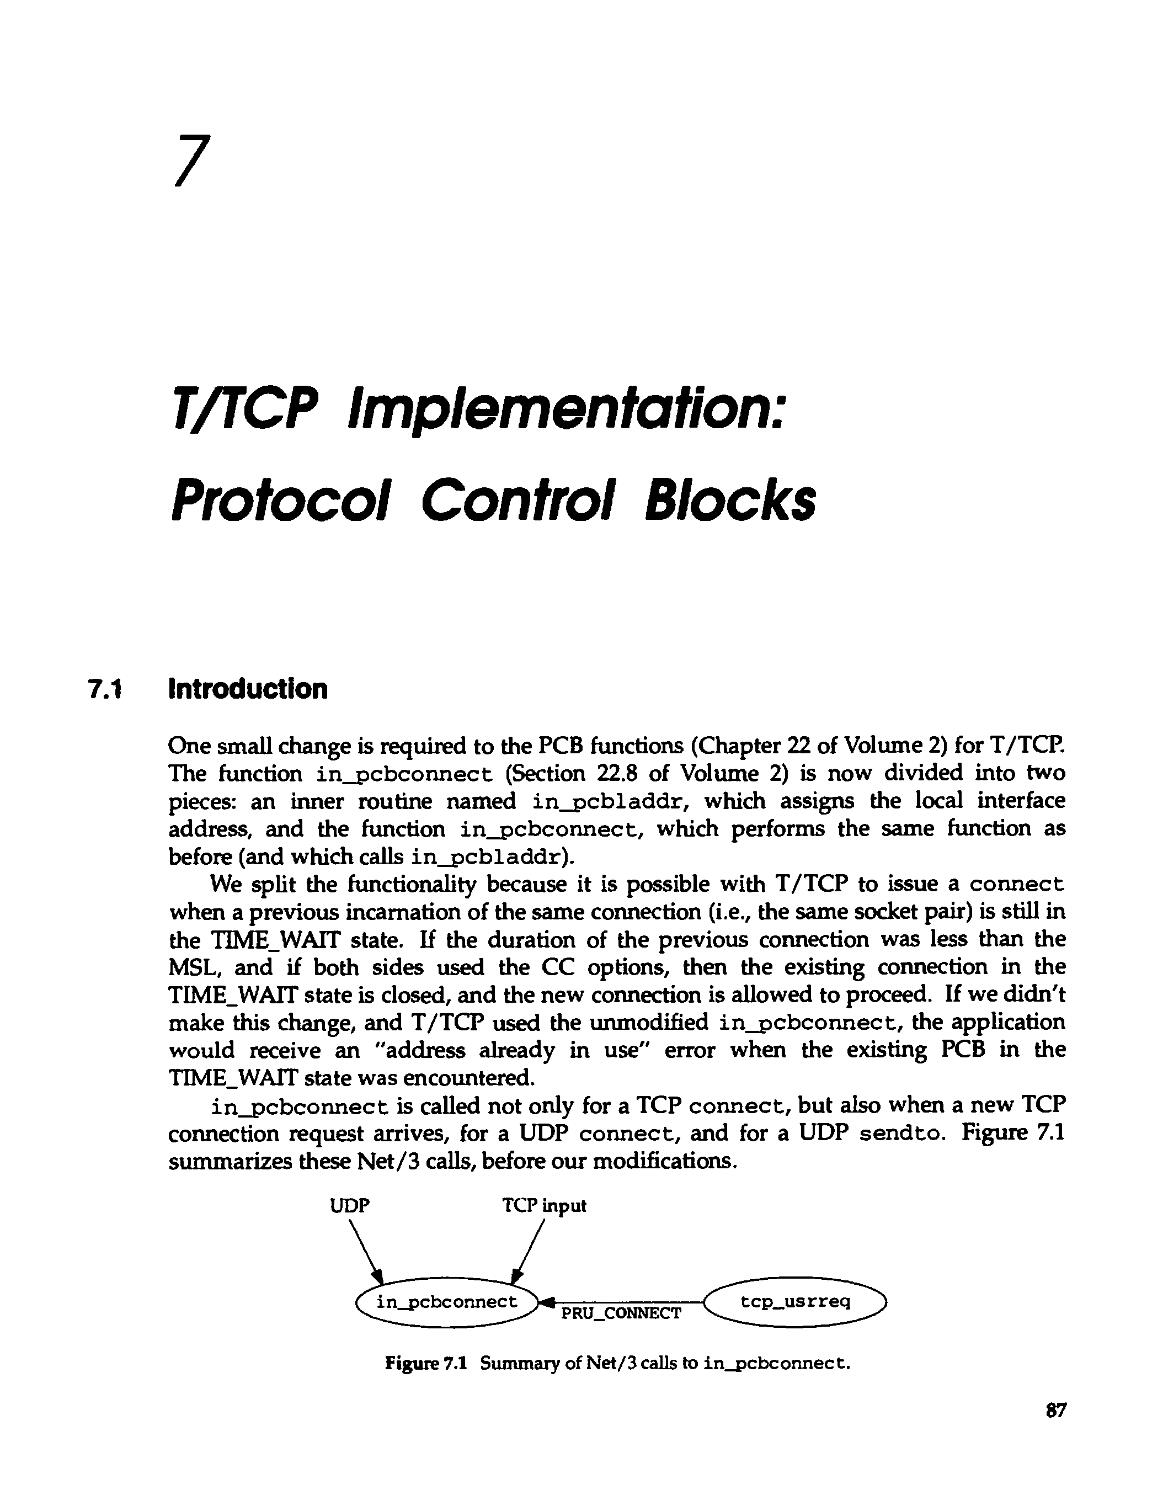 Chapter 7. T/TCP implementation: Protocol Control Blocks